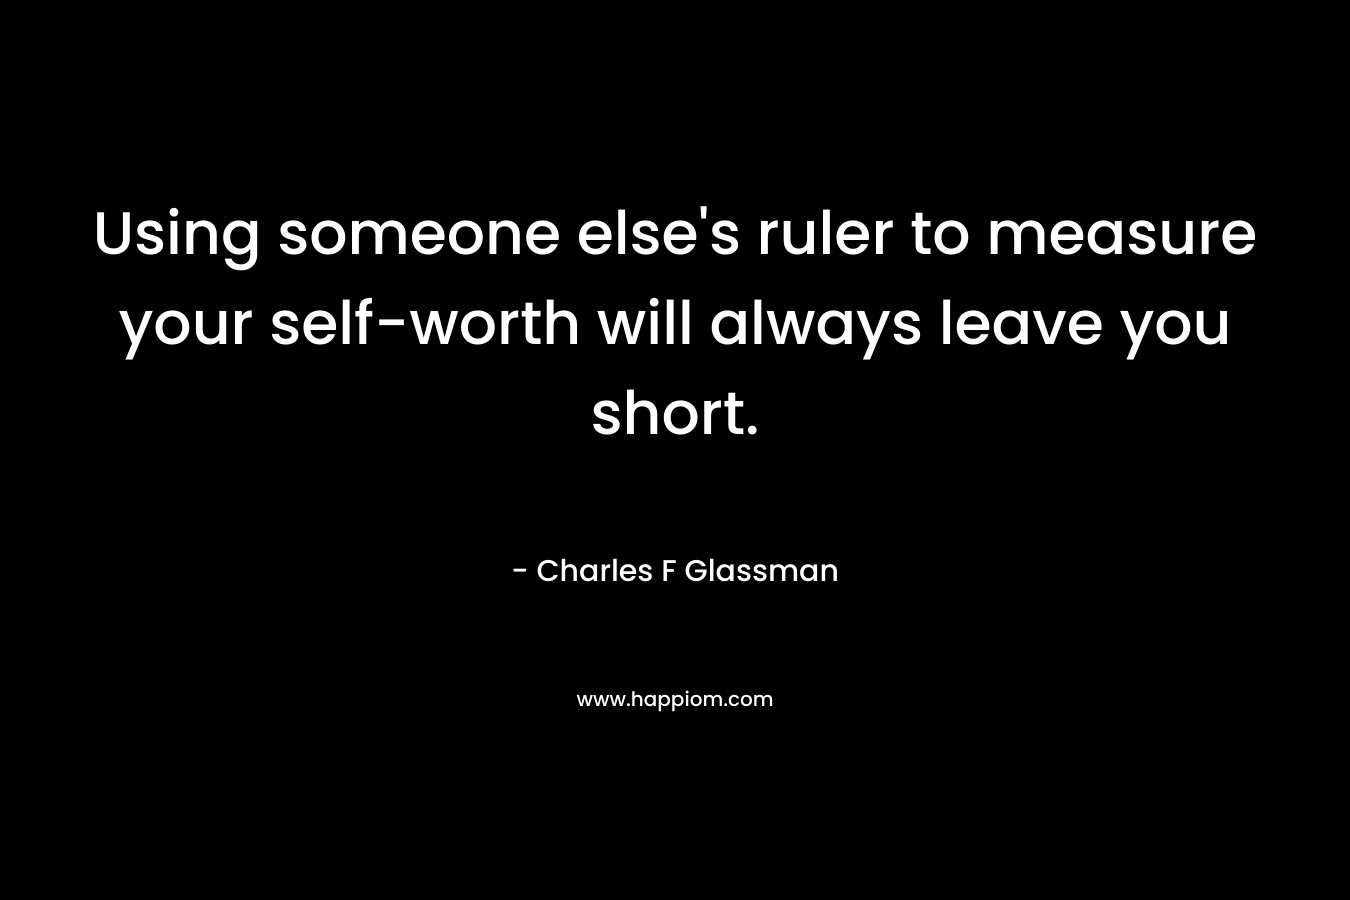 Using someone else’s ruler to measure your self-worth will always leave you short. – Charles F Glassman